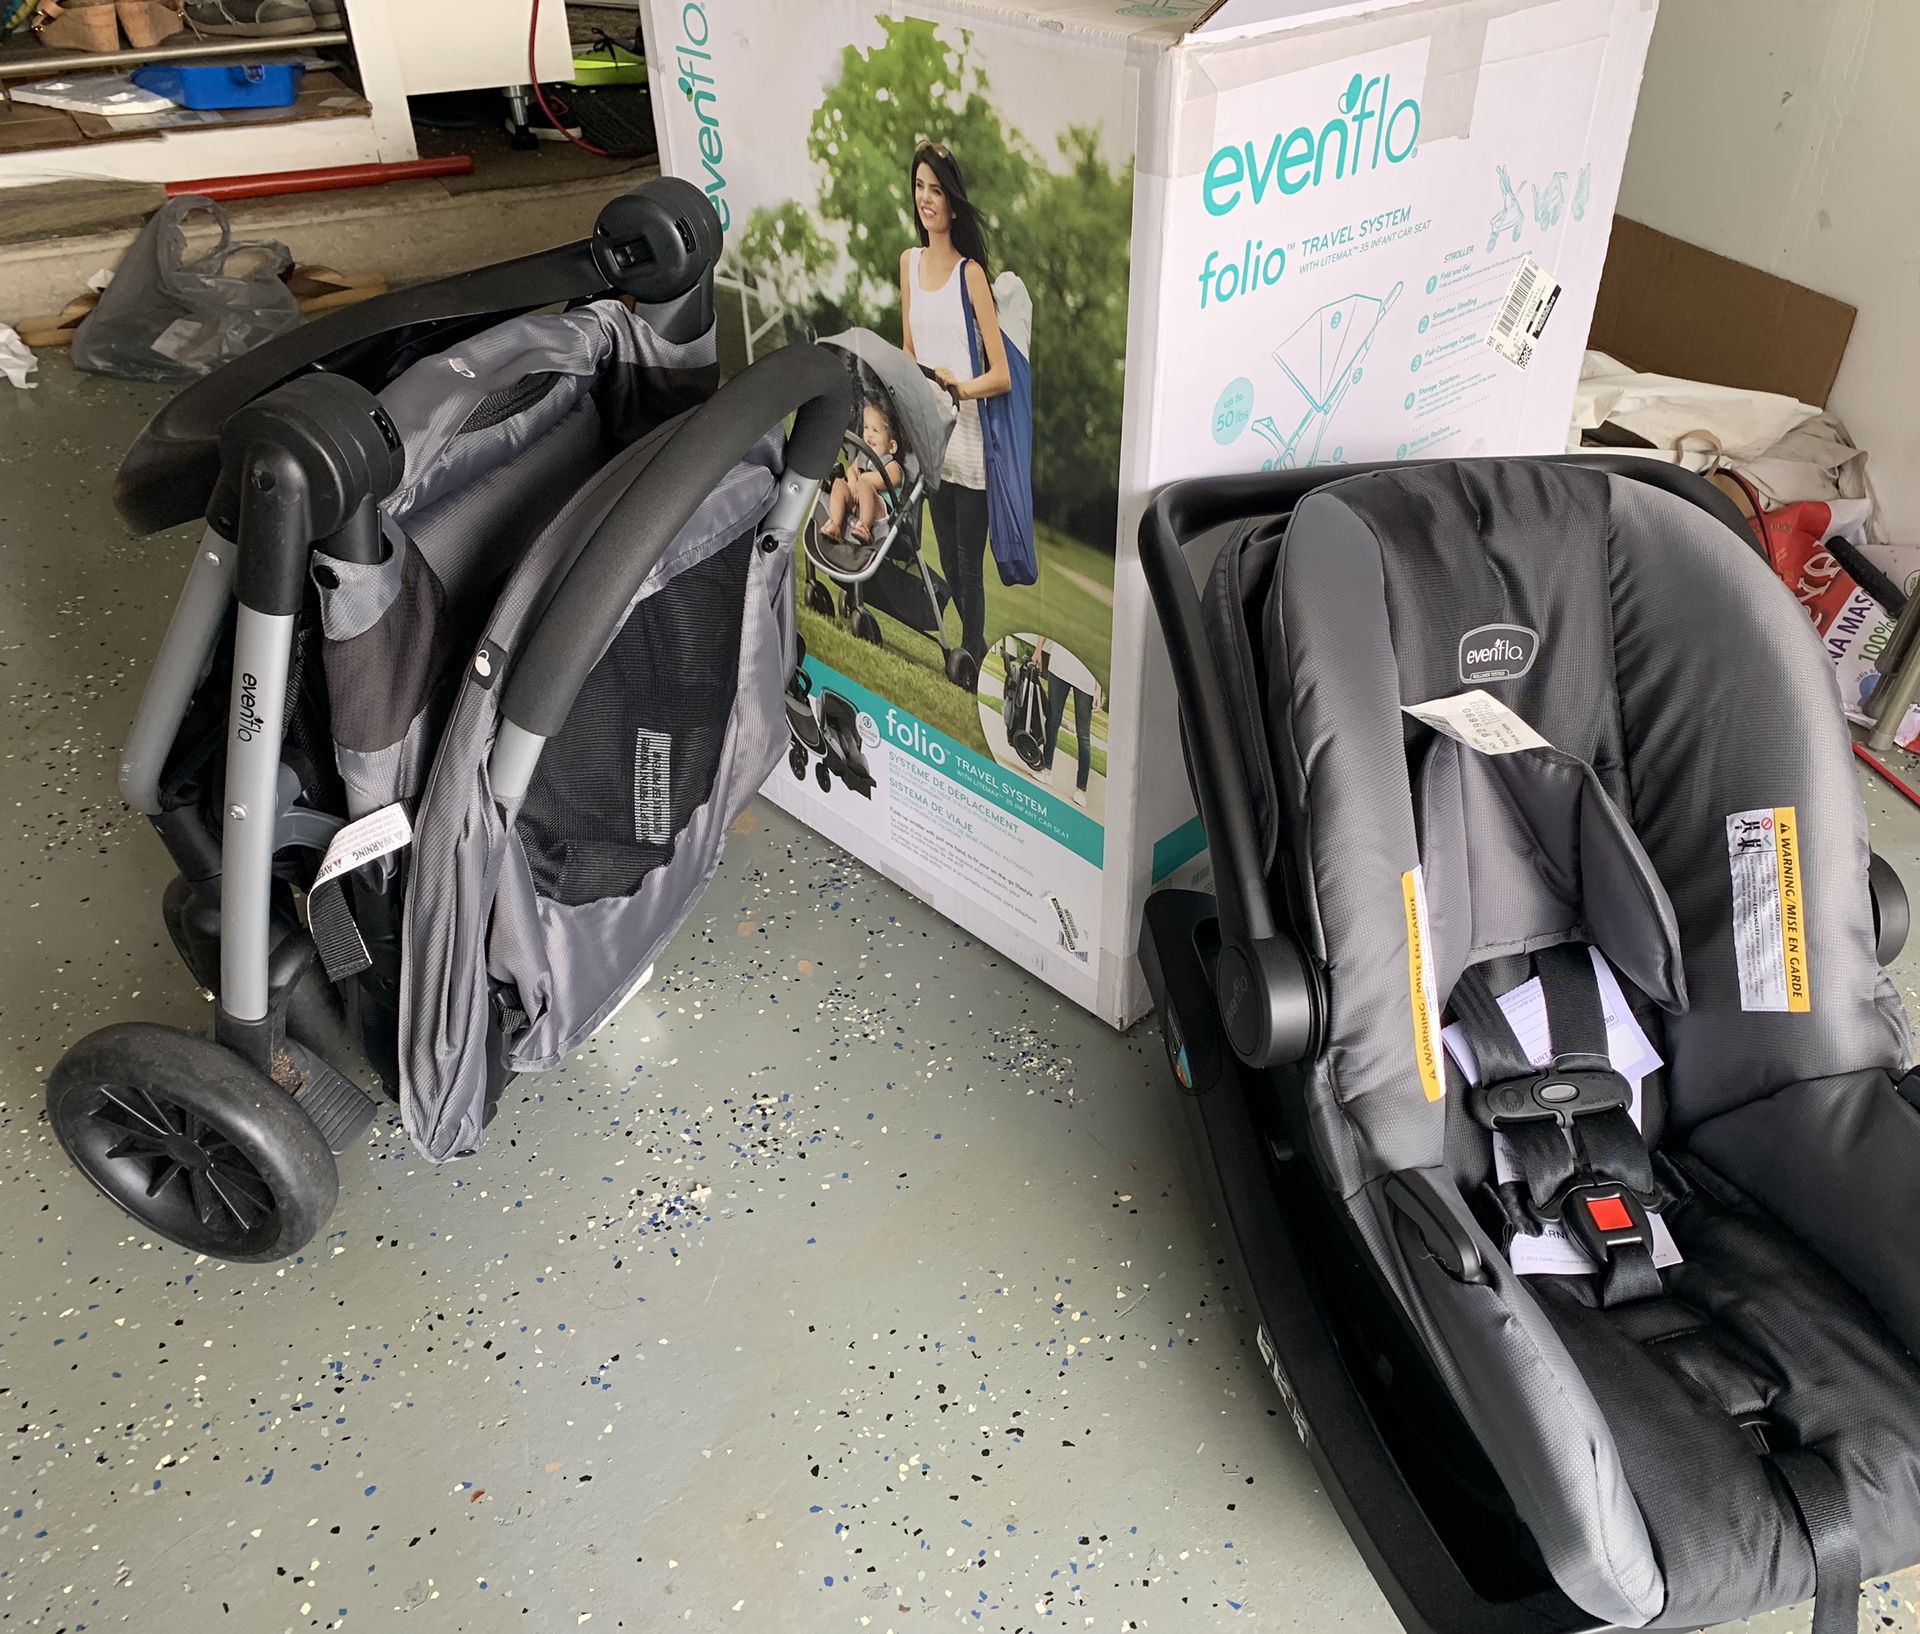 Baby Car seat and stroller - Evenflo folio Travel System